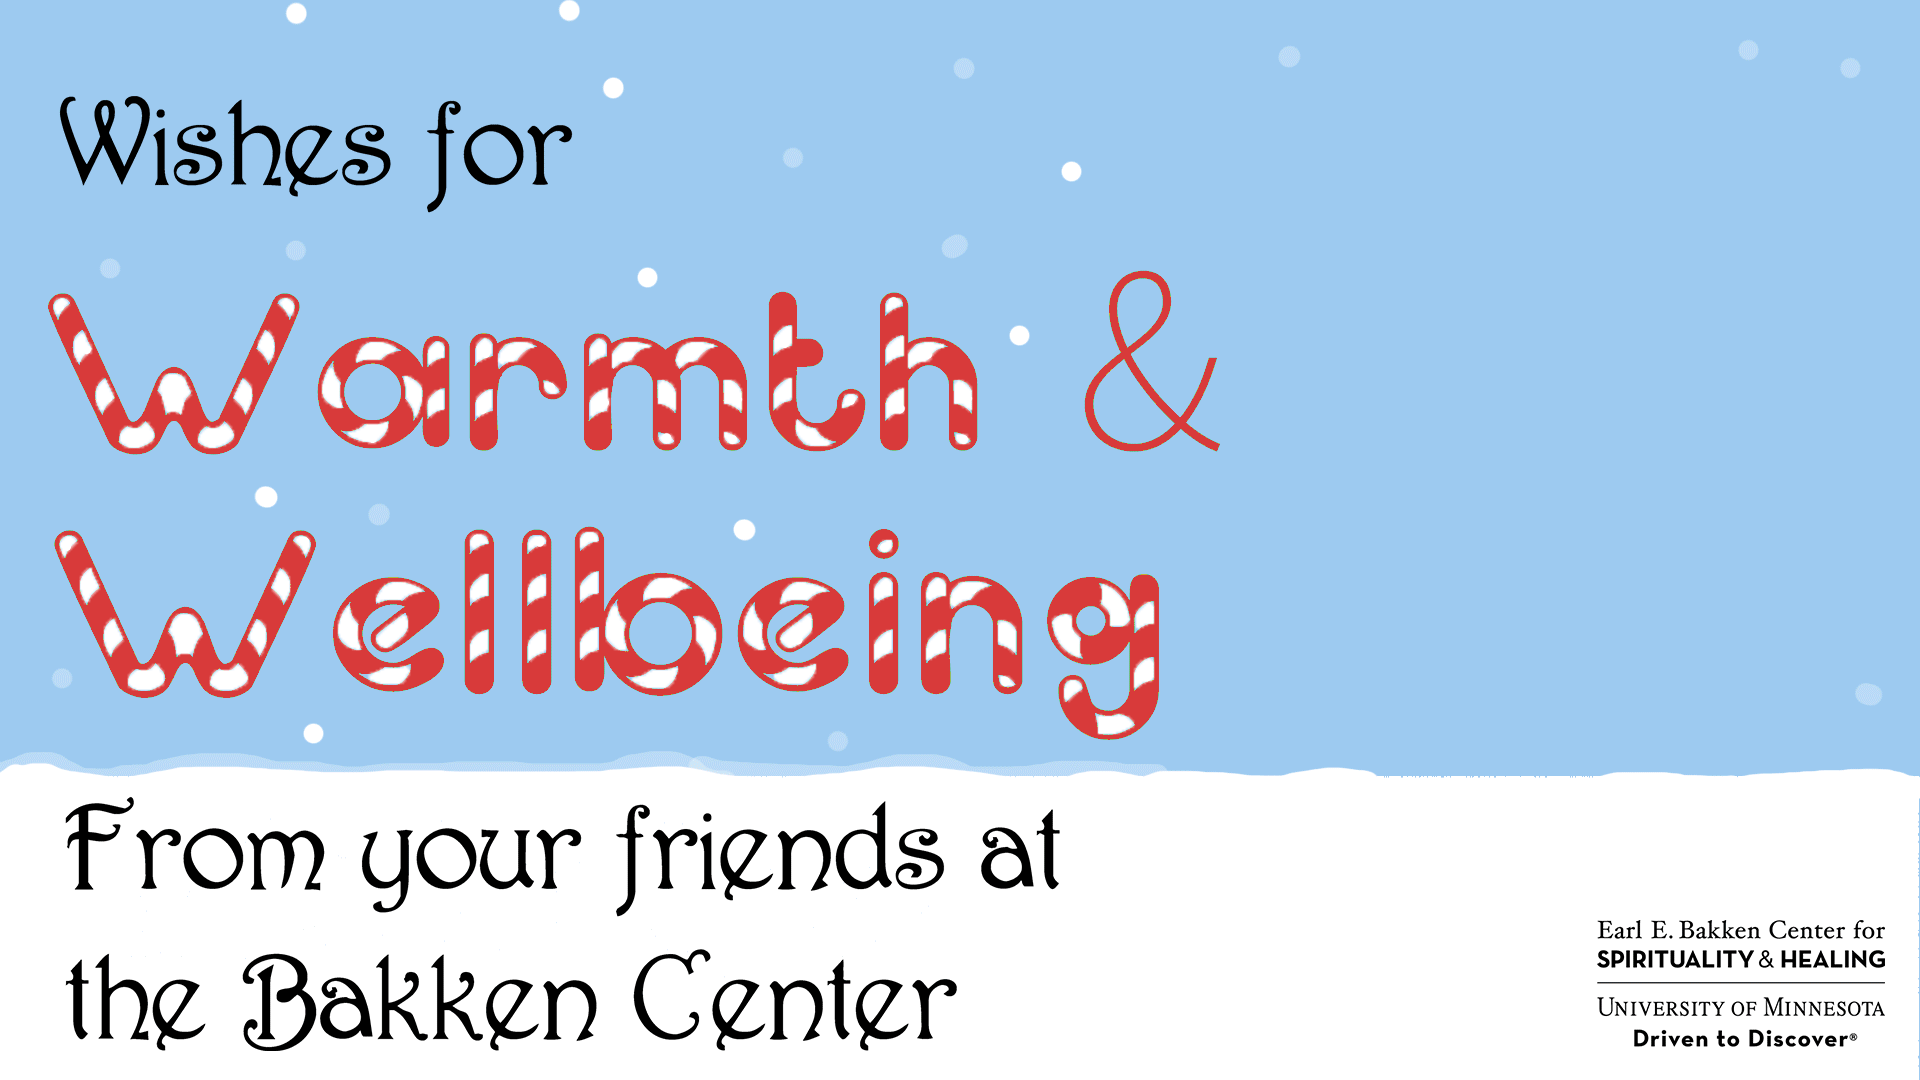 Animation of a melting snowman, with text saying: Wishes for Warmth and Wellbeing from your friends at the Bakken Center